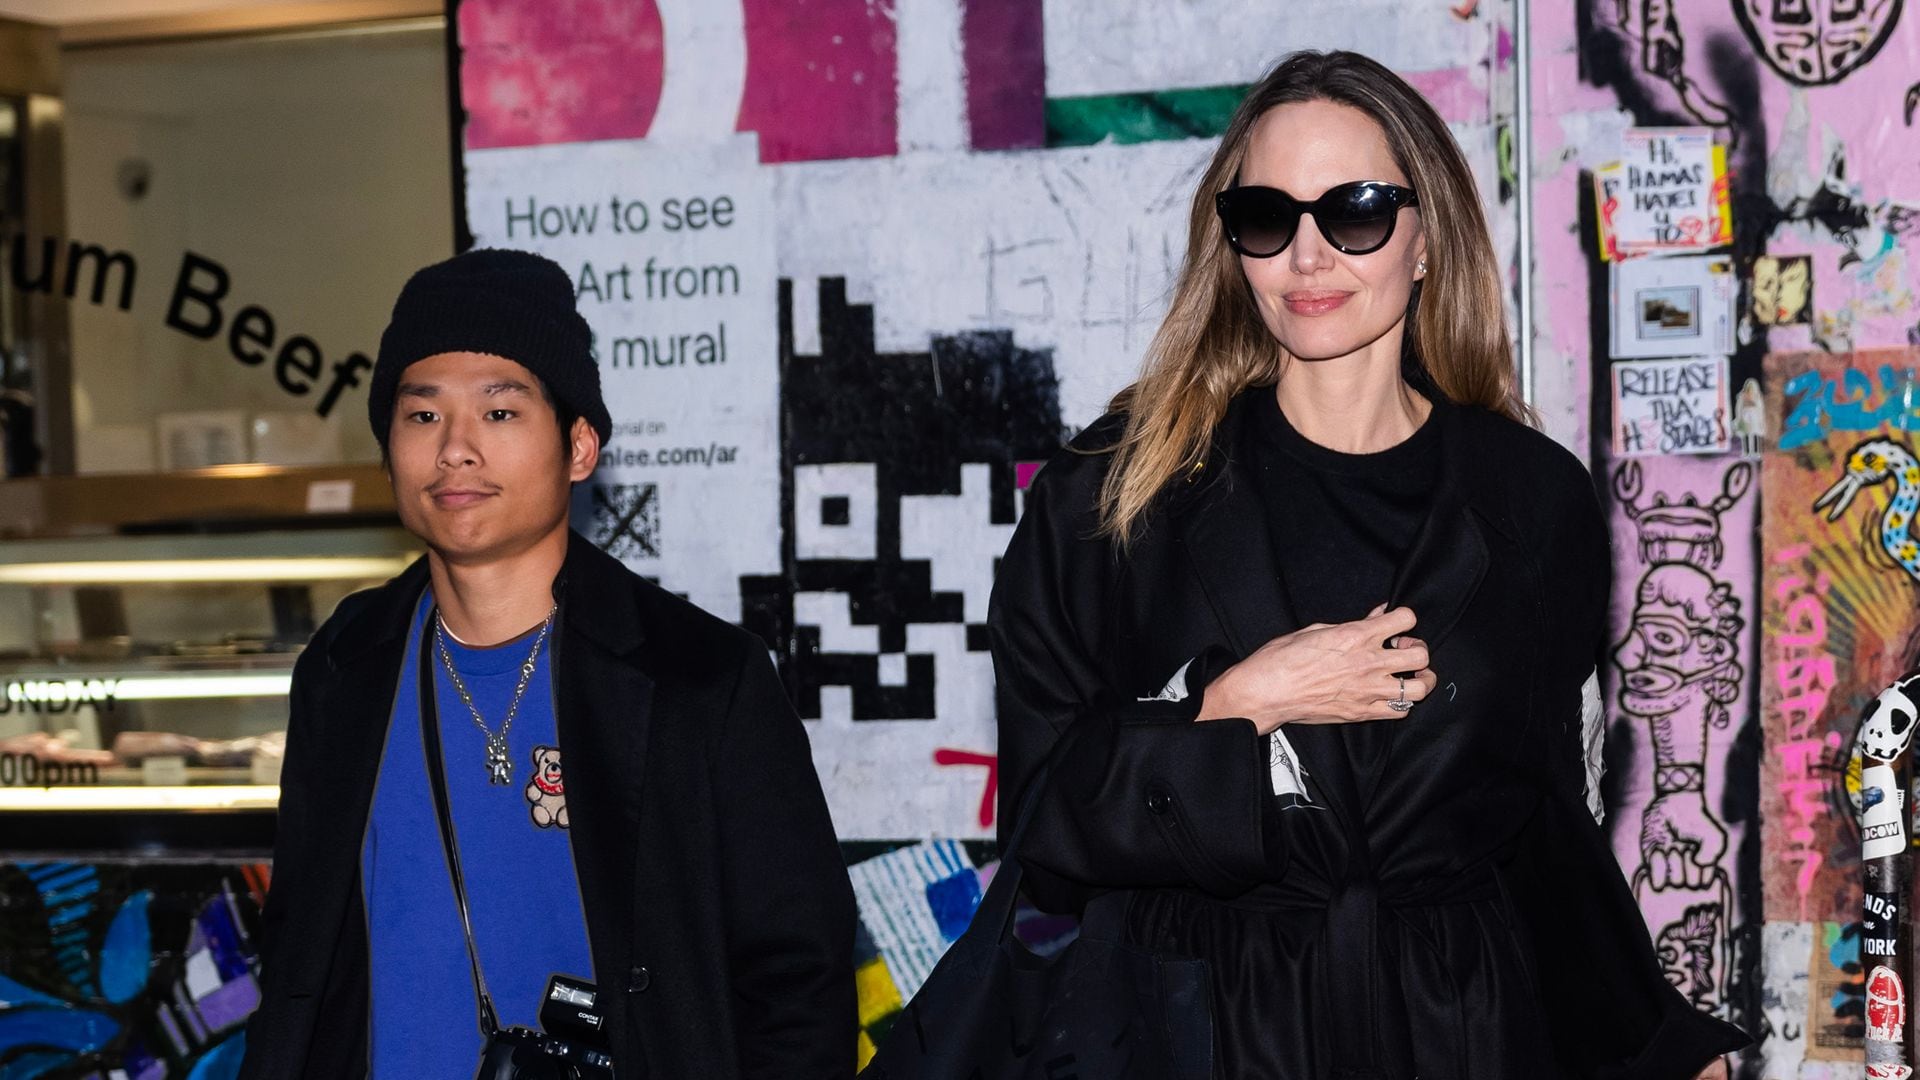  Pax Jolie-Pitt (L) and Angelina Jolie are seen in New York City in the East Village on December 28, 2023. (Photo by Gotham/GC Images)